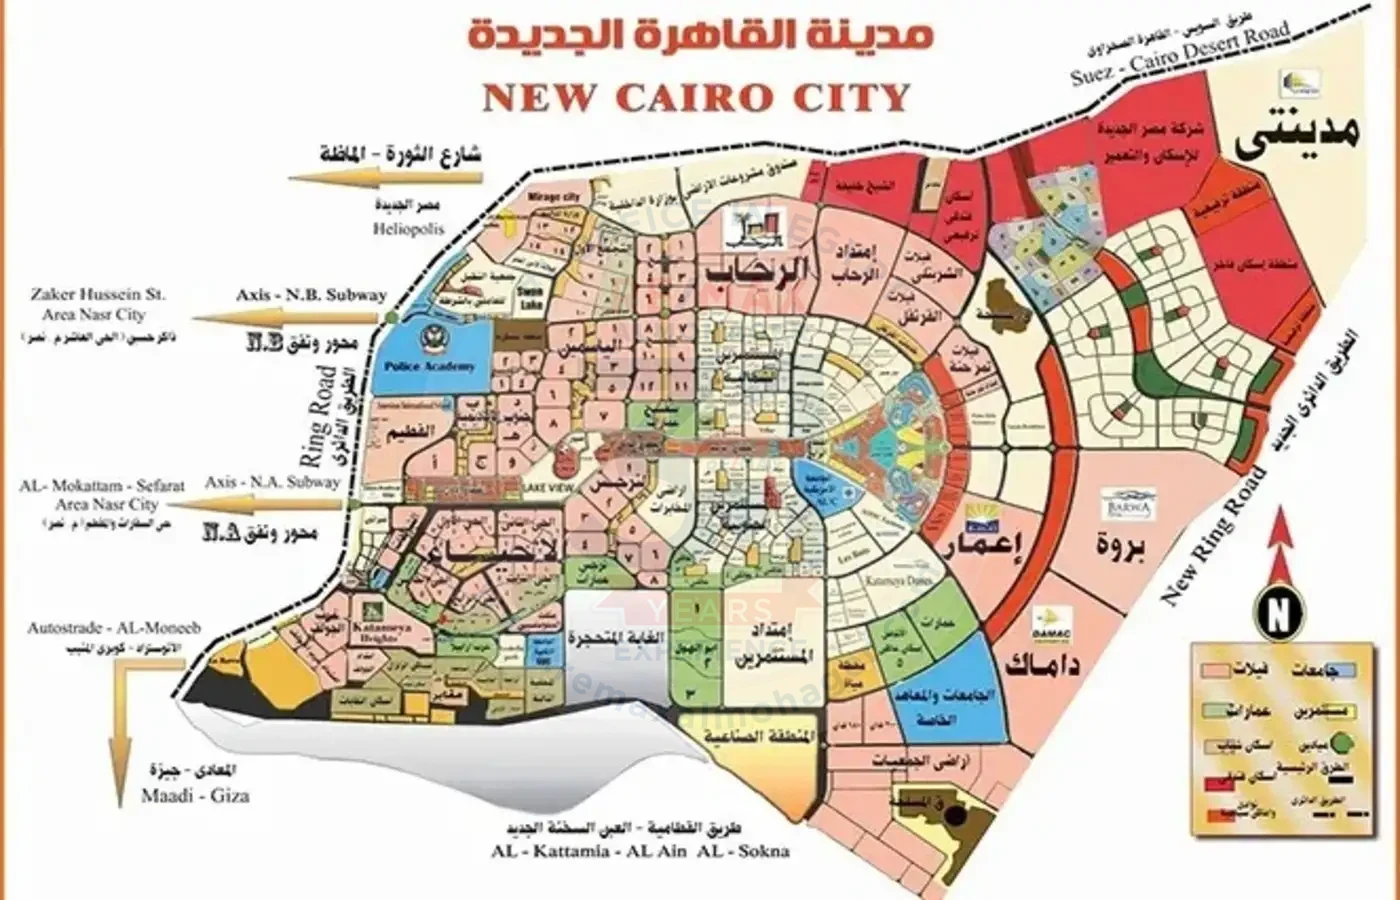 Land for sale in New Cairo